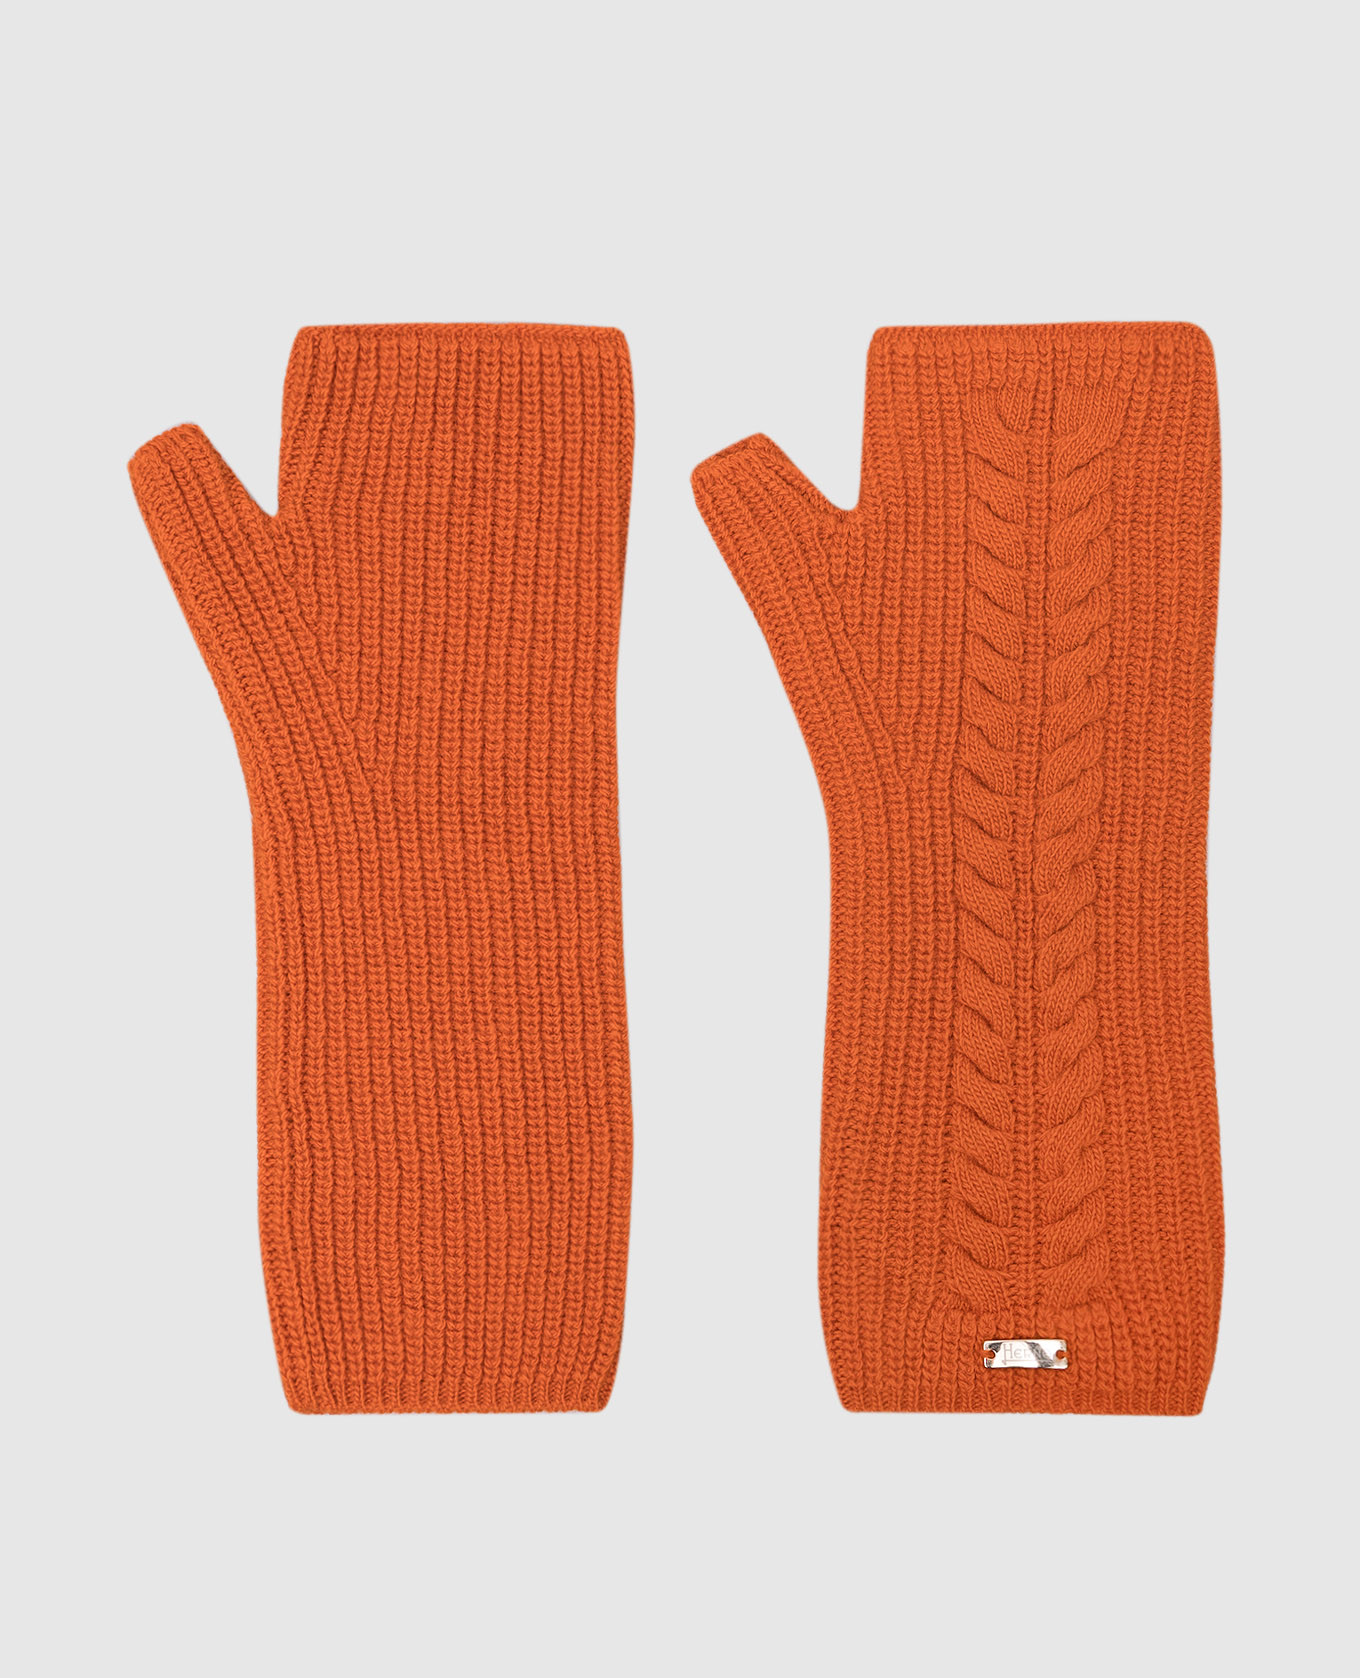 Orange mittens made of wool with a textured pattern